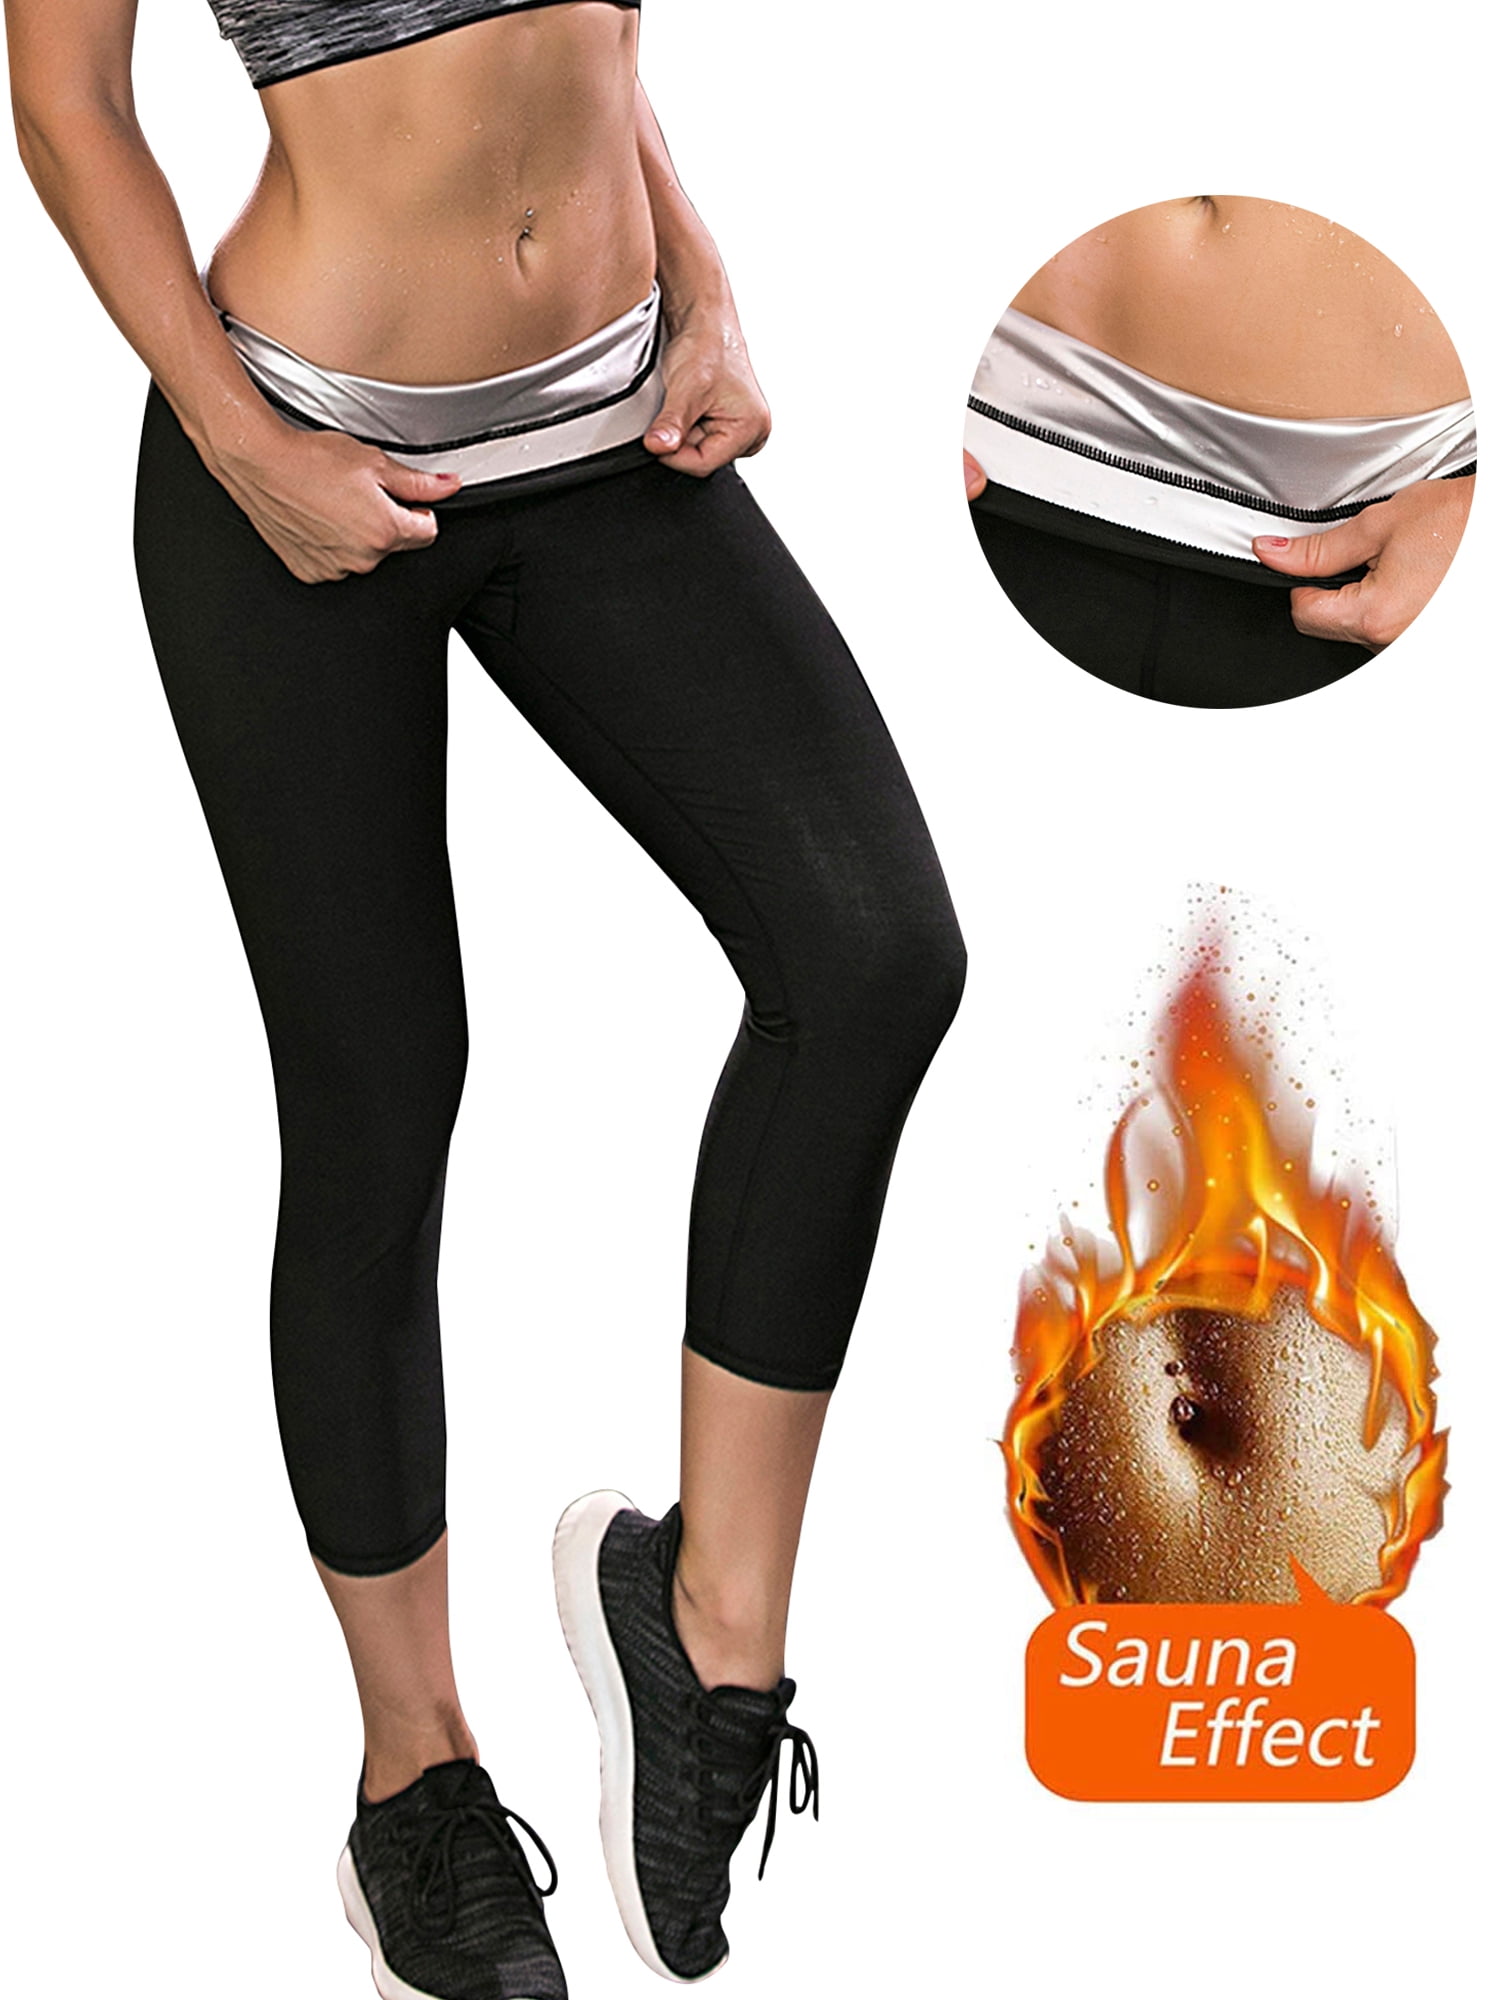 Ursexyly Women Sauna Sweat Pants Hot Thermo Fitness Exercise Leggings High Waist Slimming Workout Waist Trainer Capris 